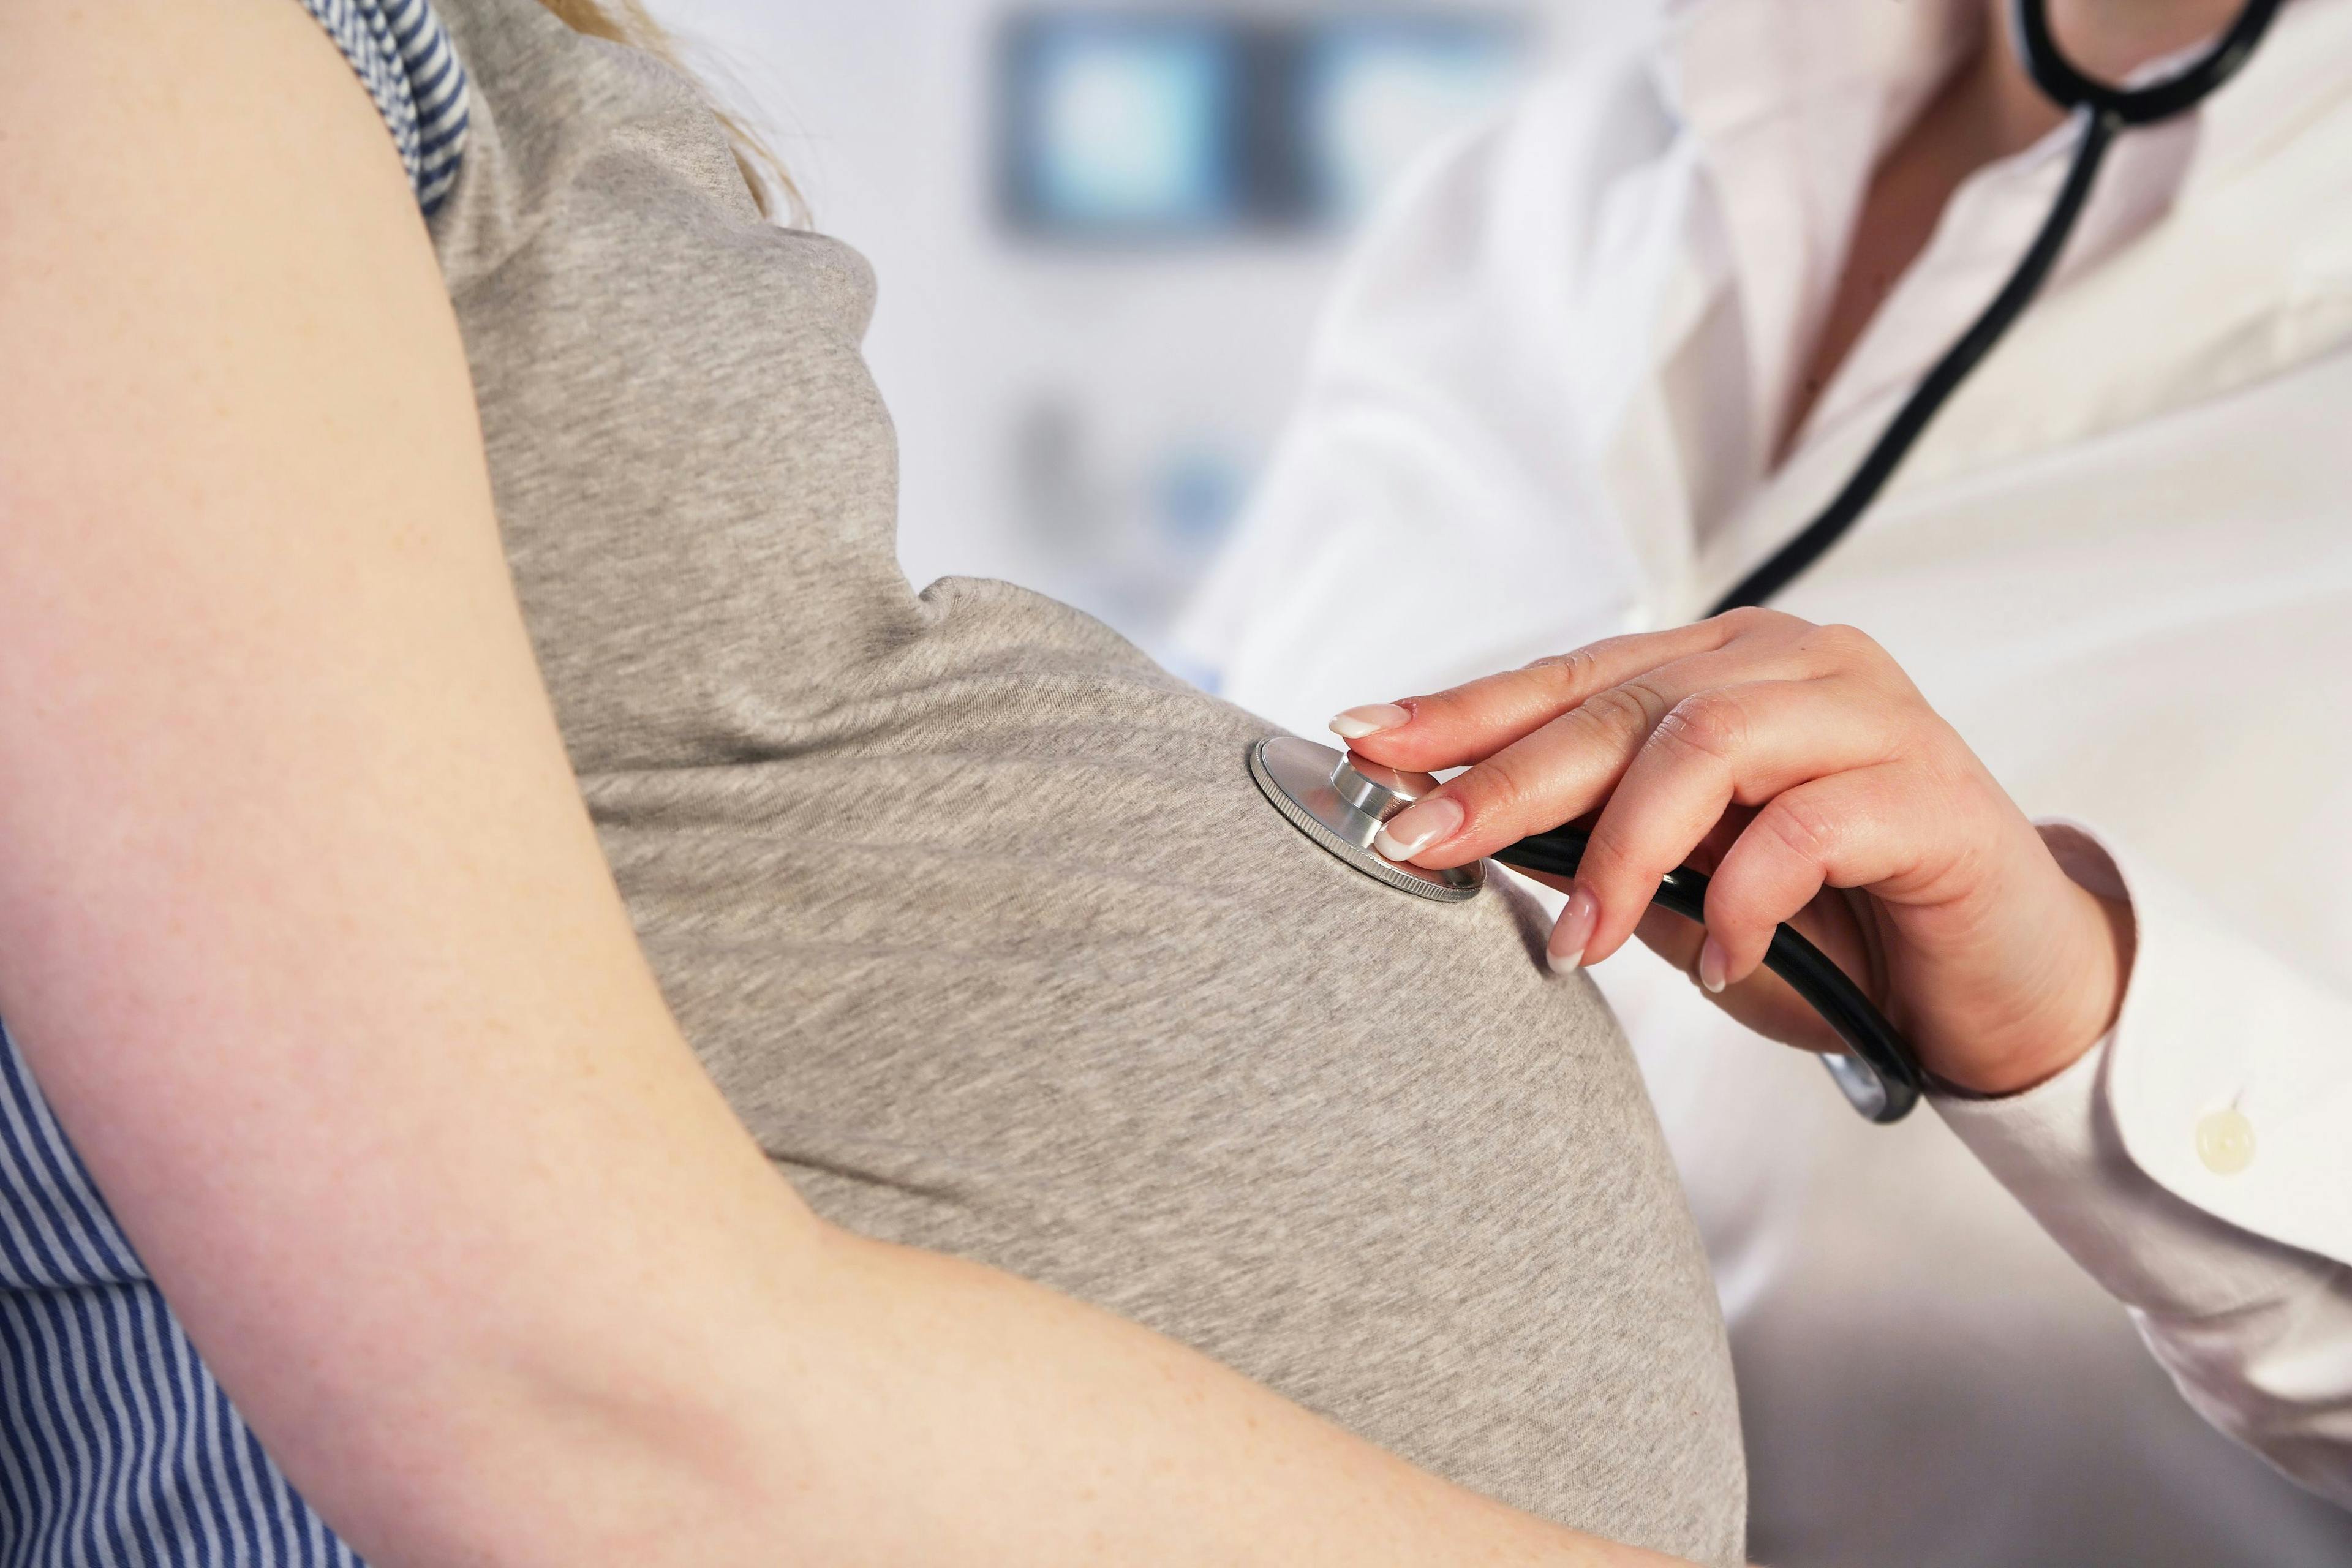 New tool to compare rates of severe pregnancy complications across U.S. hospitals